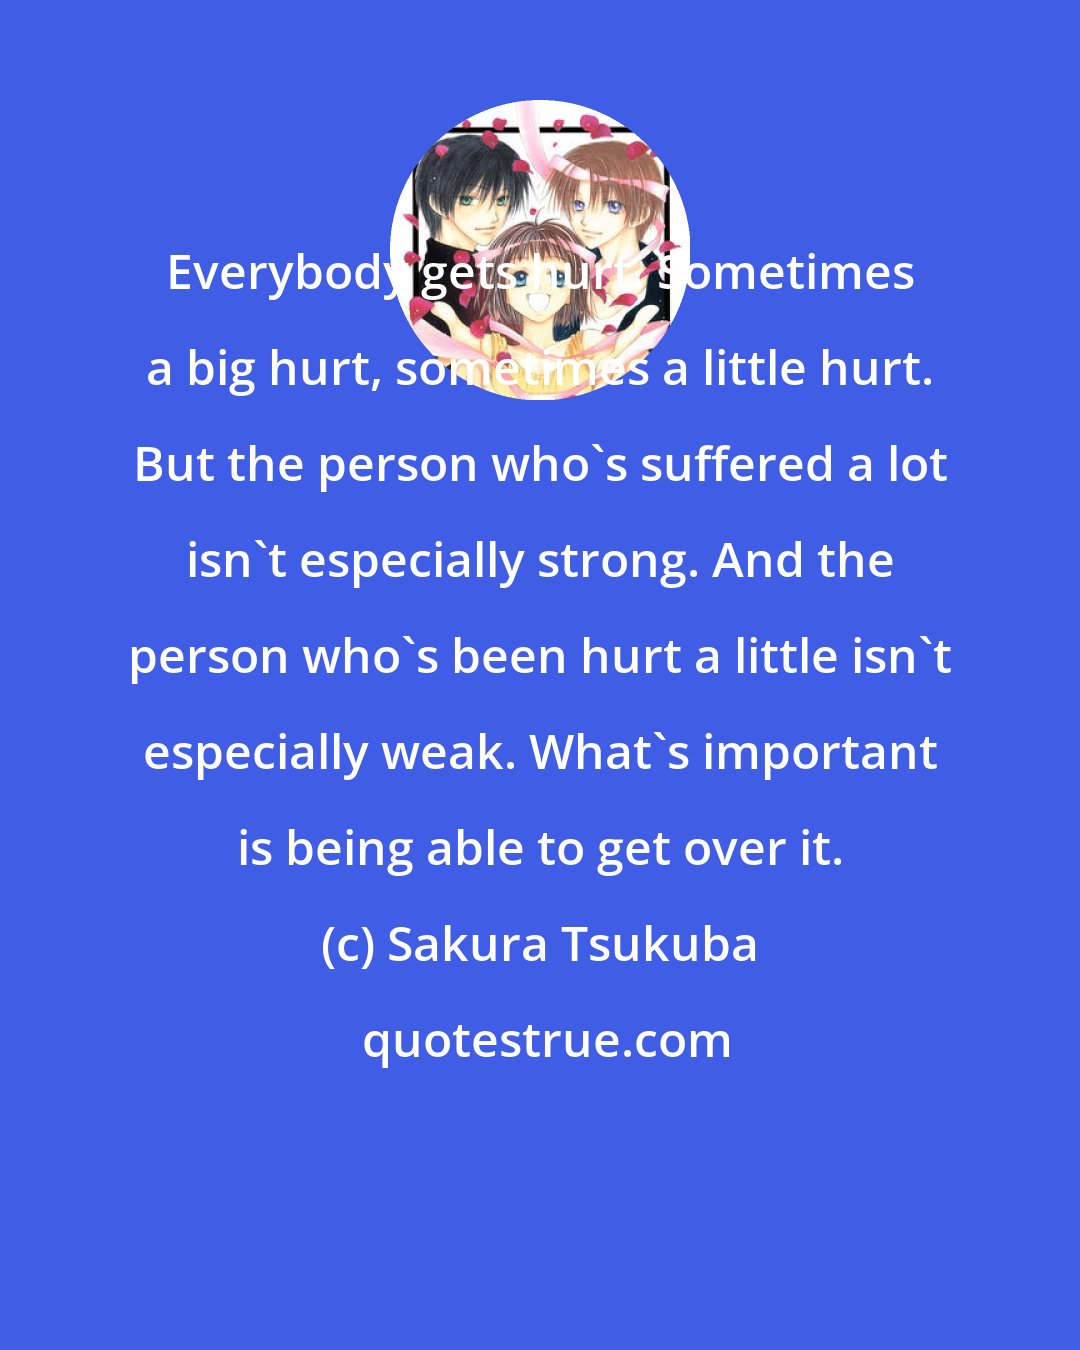 Sakura Tsukuba: Everybody gets hurt. Sometimes a big hurt, sometimes a little hurt. But the person who's suffered a lot isn't especially strong. And the person who's been hurt a little isn't especially weak. What's important is being able to get over it.